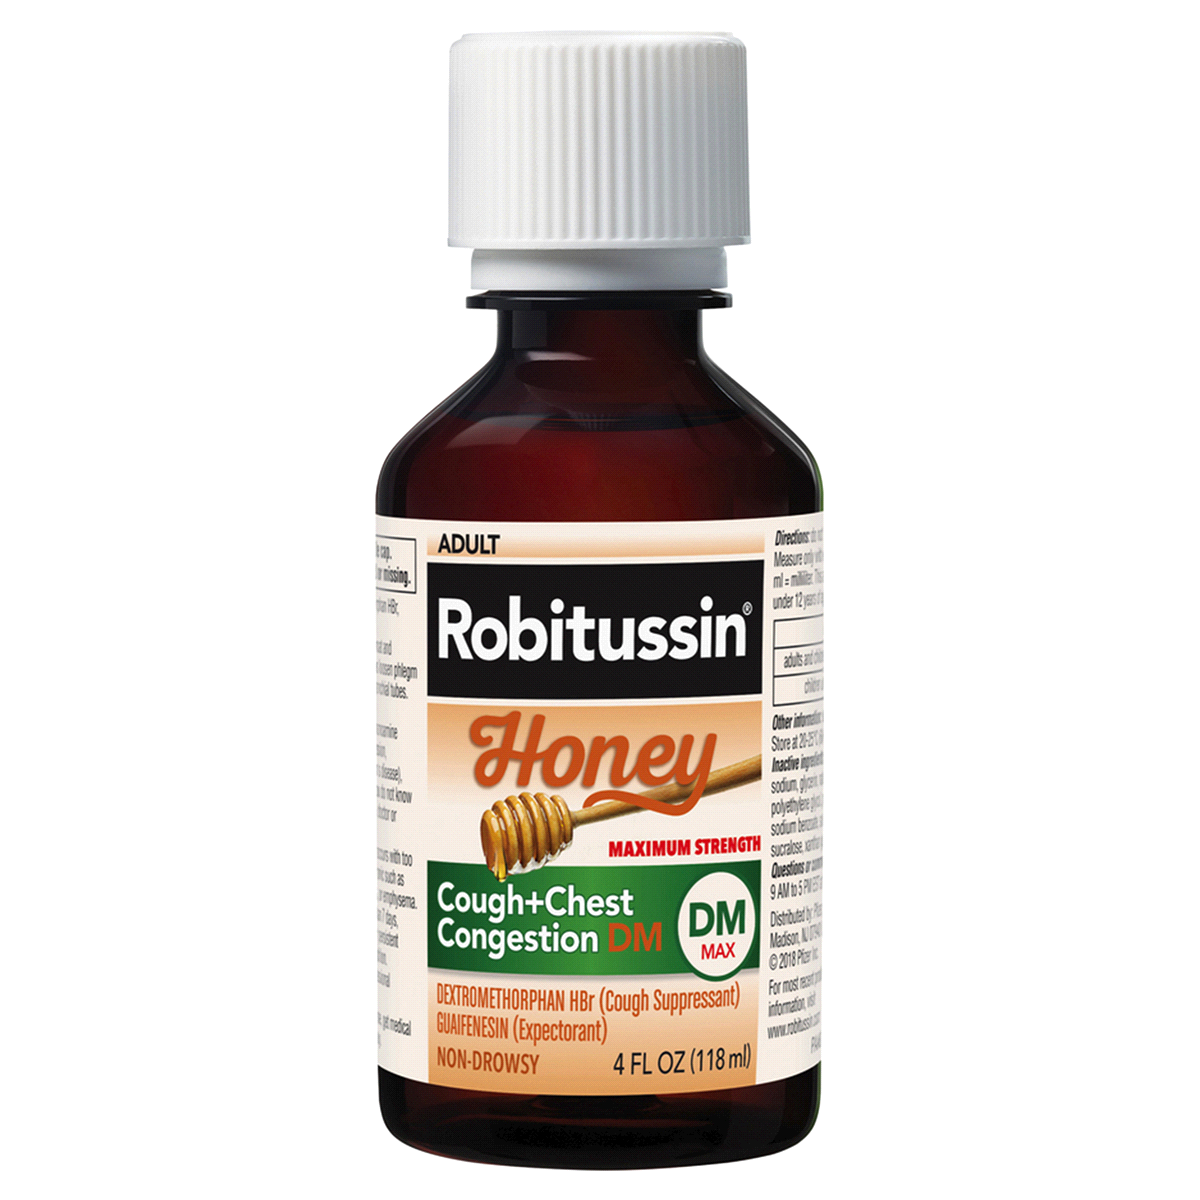 slide 4 of 5, Robitussin Maximum Strength Honey Cough + Chest Congestion DM, Cough Medicine for Cough and Chest Congestion Relief Made with Real Honey - 4 Fl Oz Bottle, 4 oz